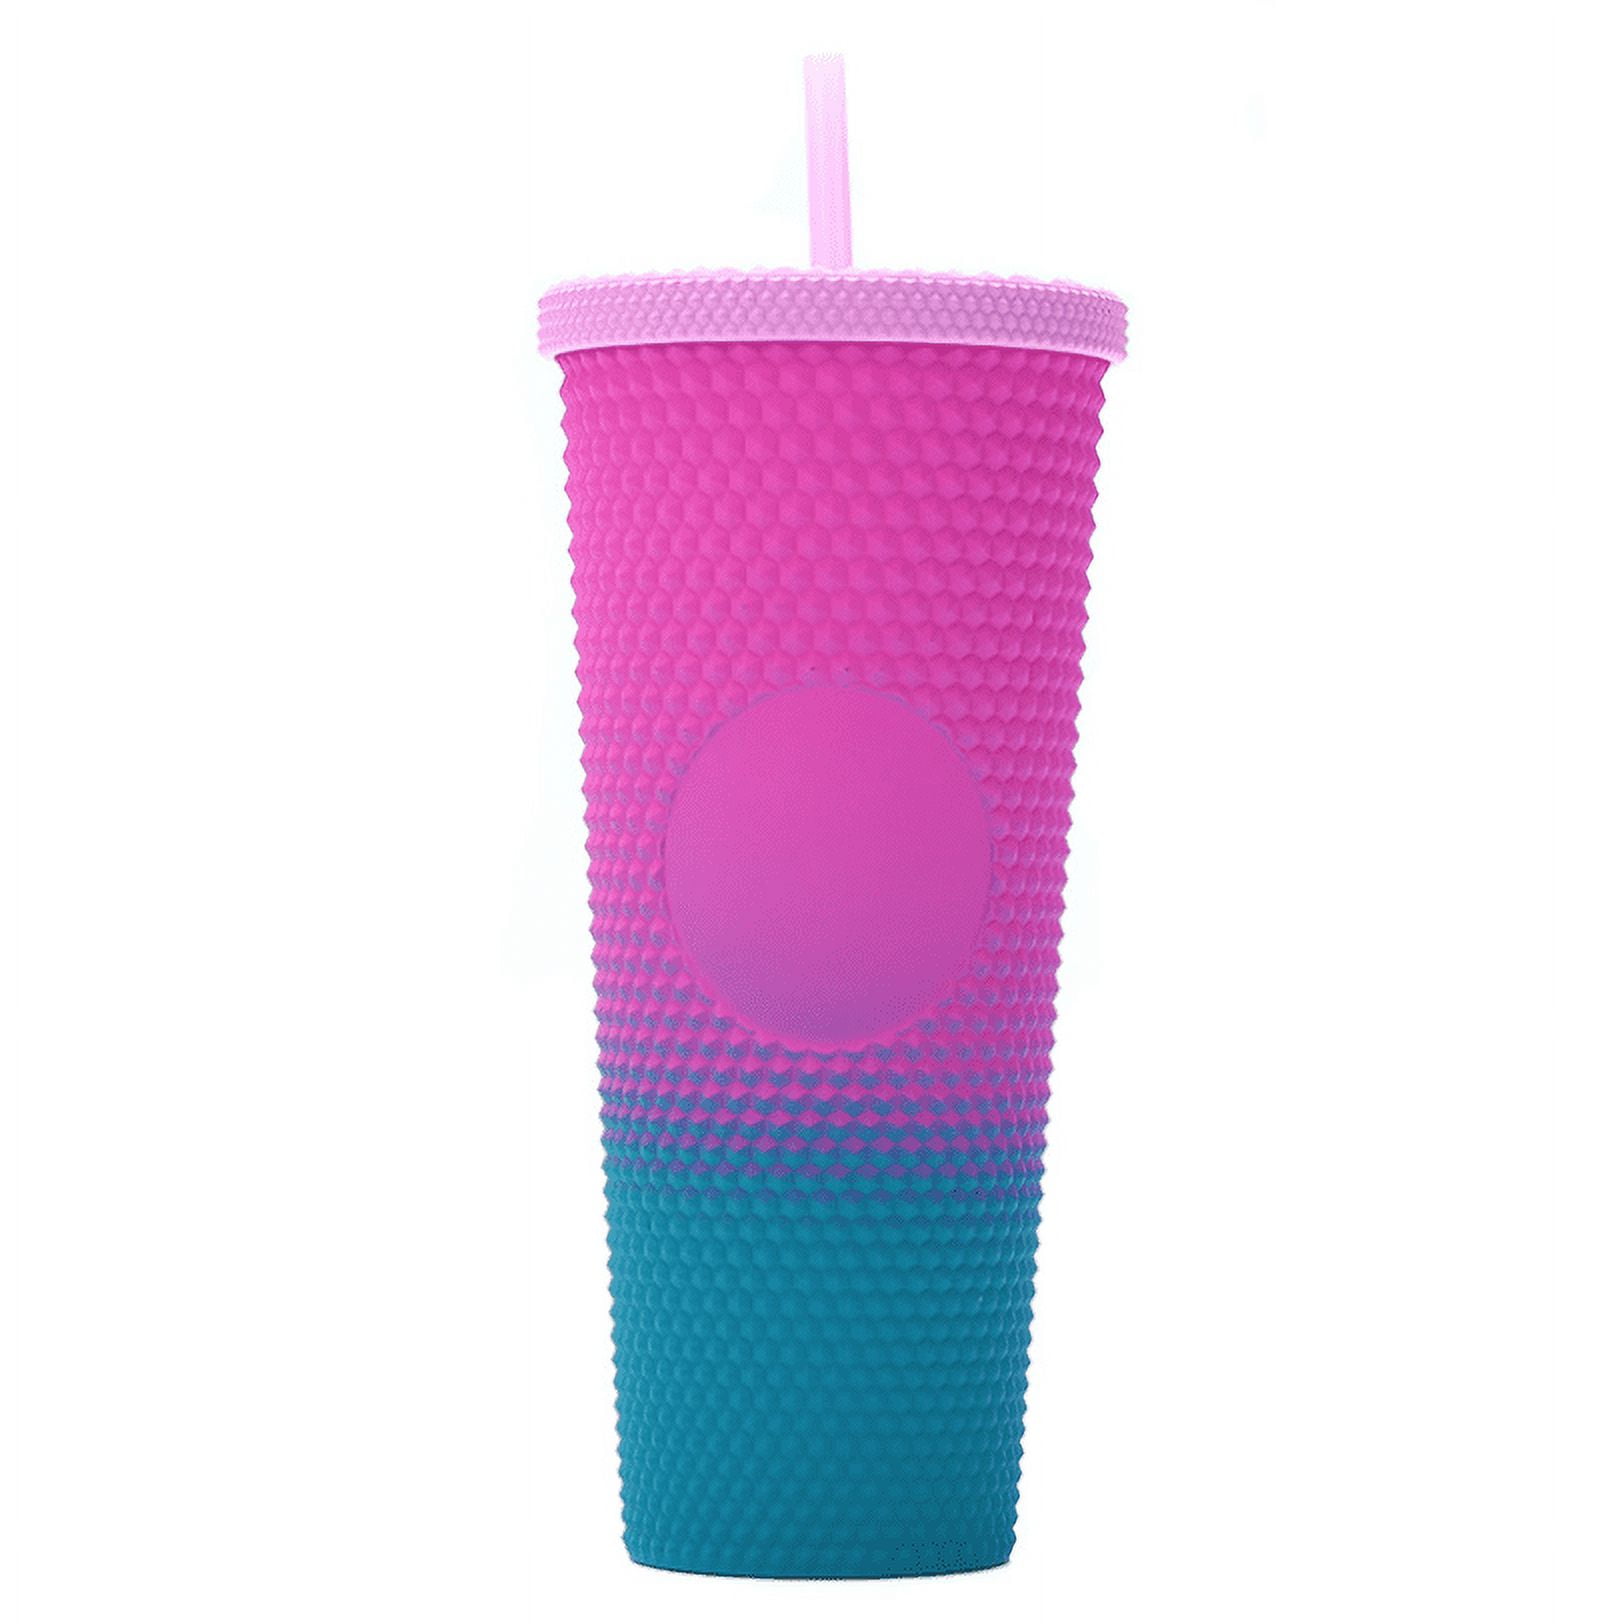 I found the viral $12 tumbler cup dupe at Walmart – it keeps my